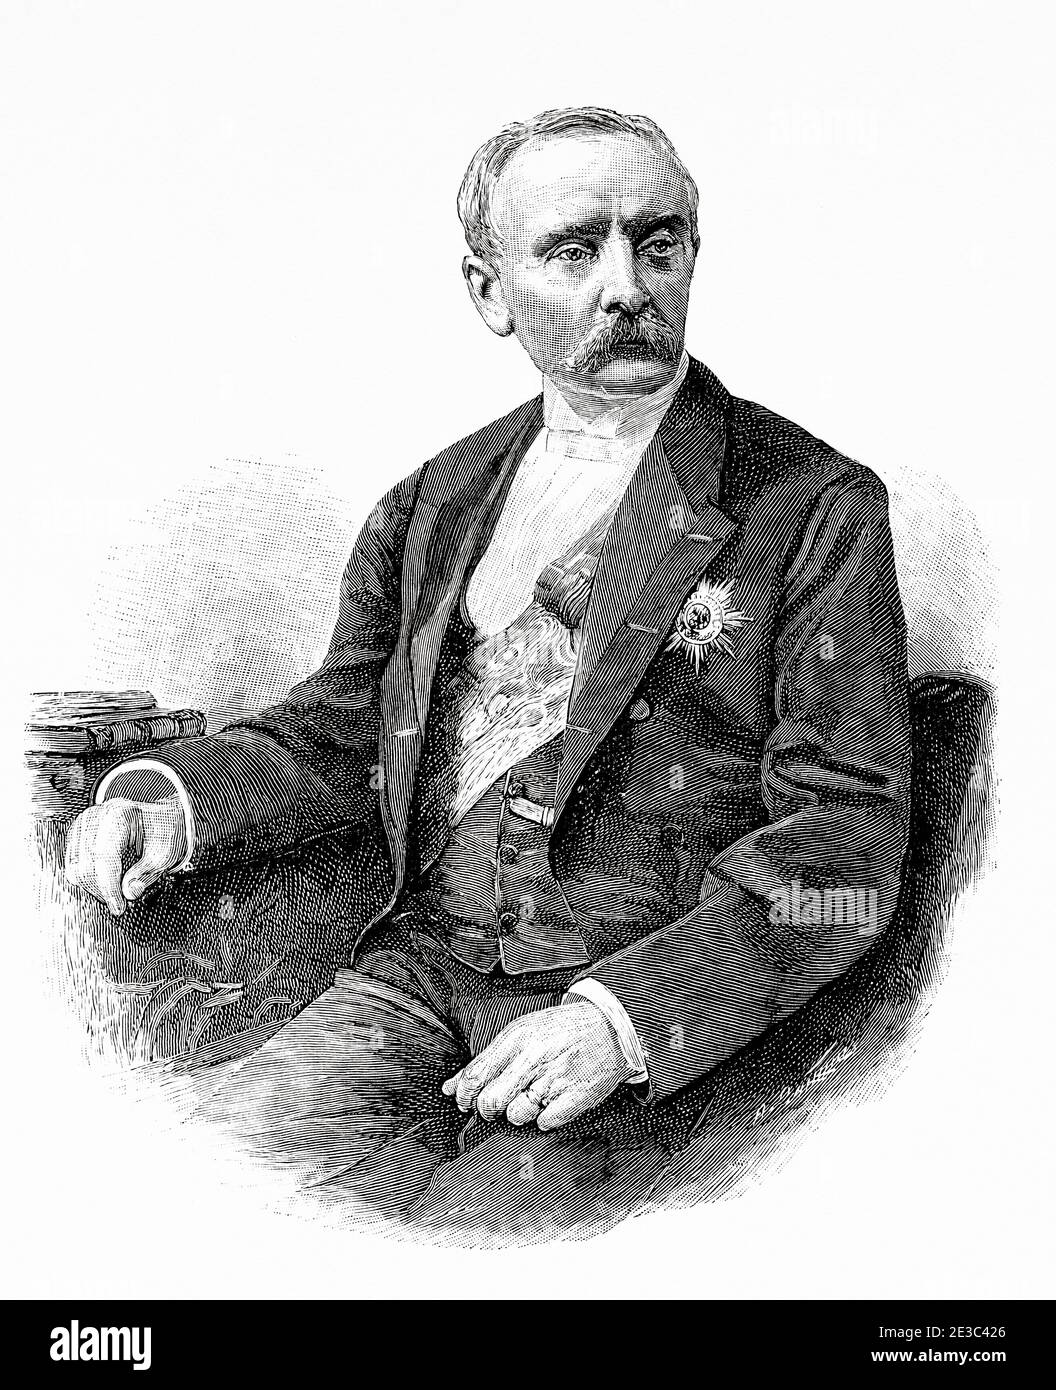 Portrait of Chlodwig Carl Viktor. Prince of Hohenlohe-Schillingsfürst, Prince of Hohenlohe (1819 -1901) German statesman, Chancellor of Germany and Prime Minister of Prussia. Old XIX century engraved illustration from La Ilustracion Española y Americana 1894 Stock Photo